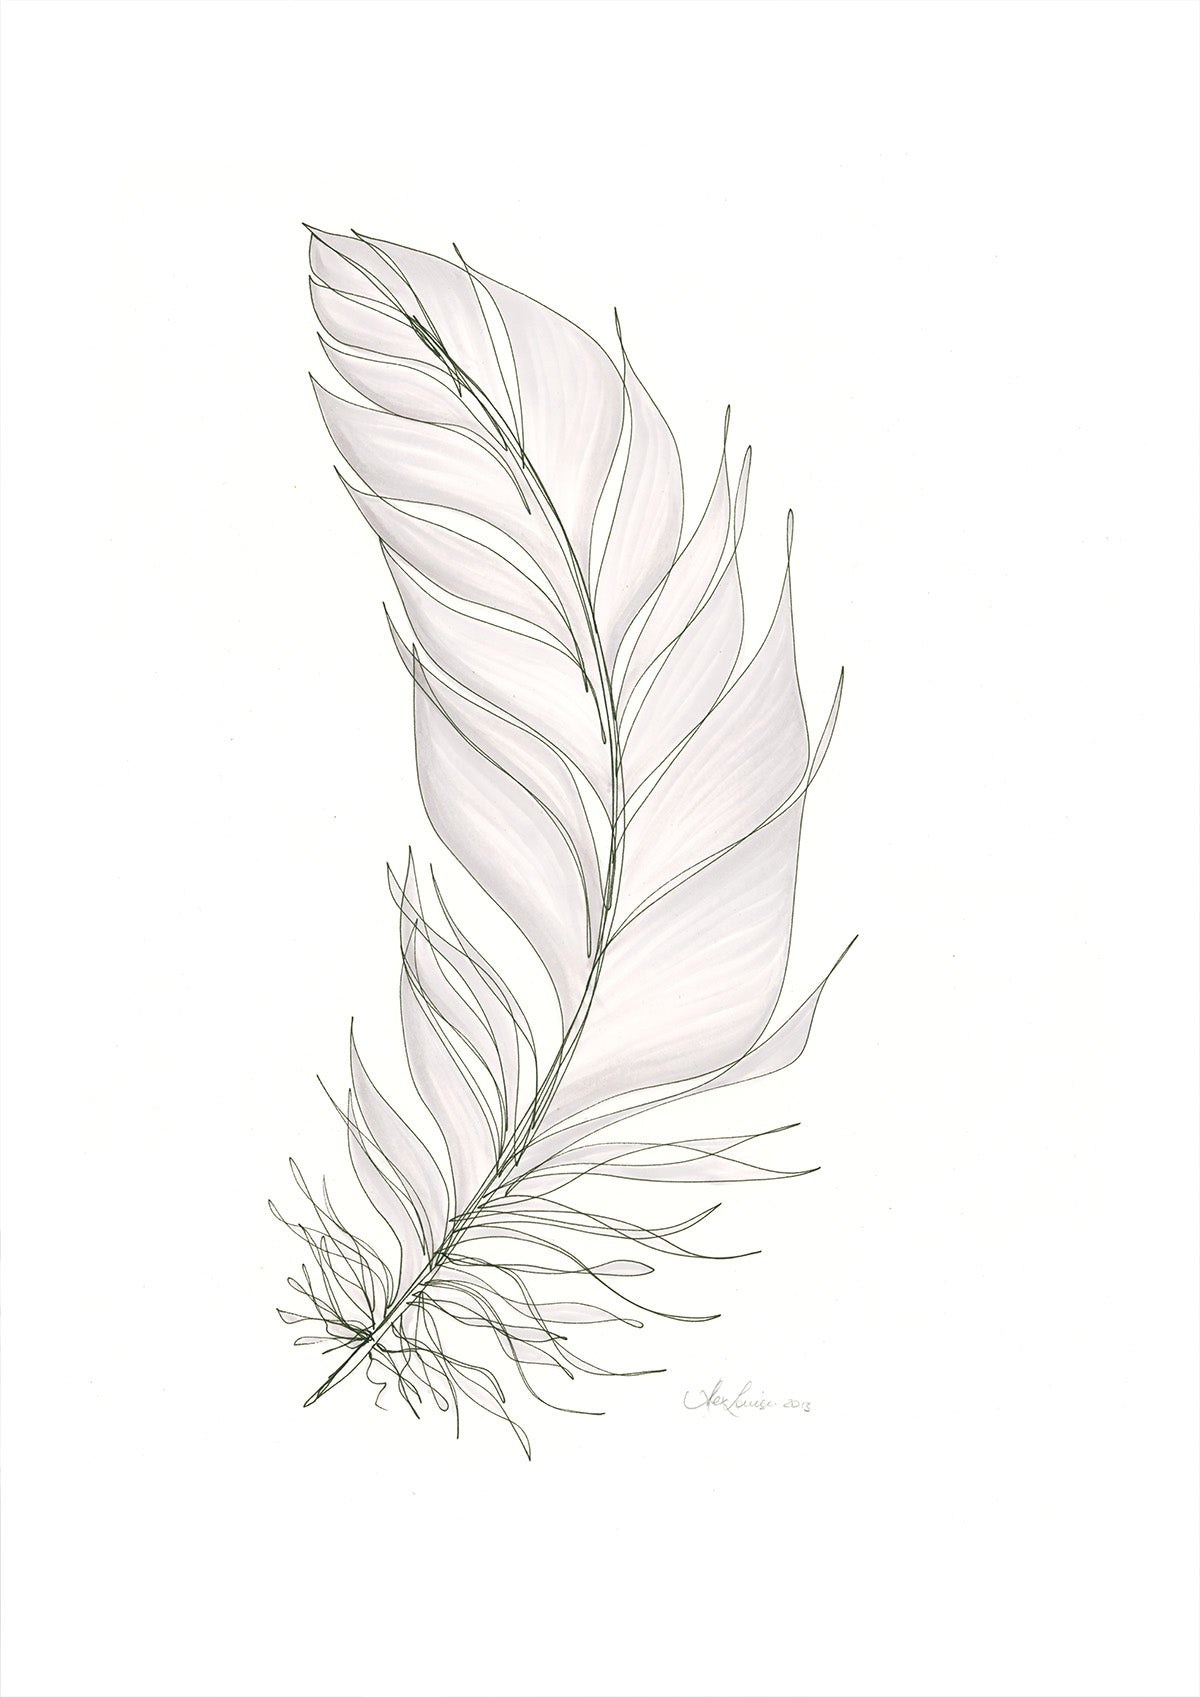 Feather Lines #11 - 12 x 16"